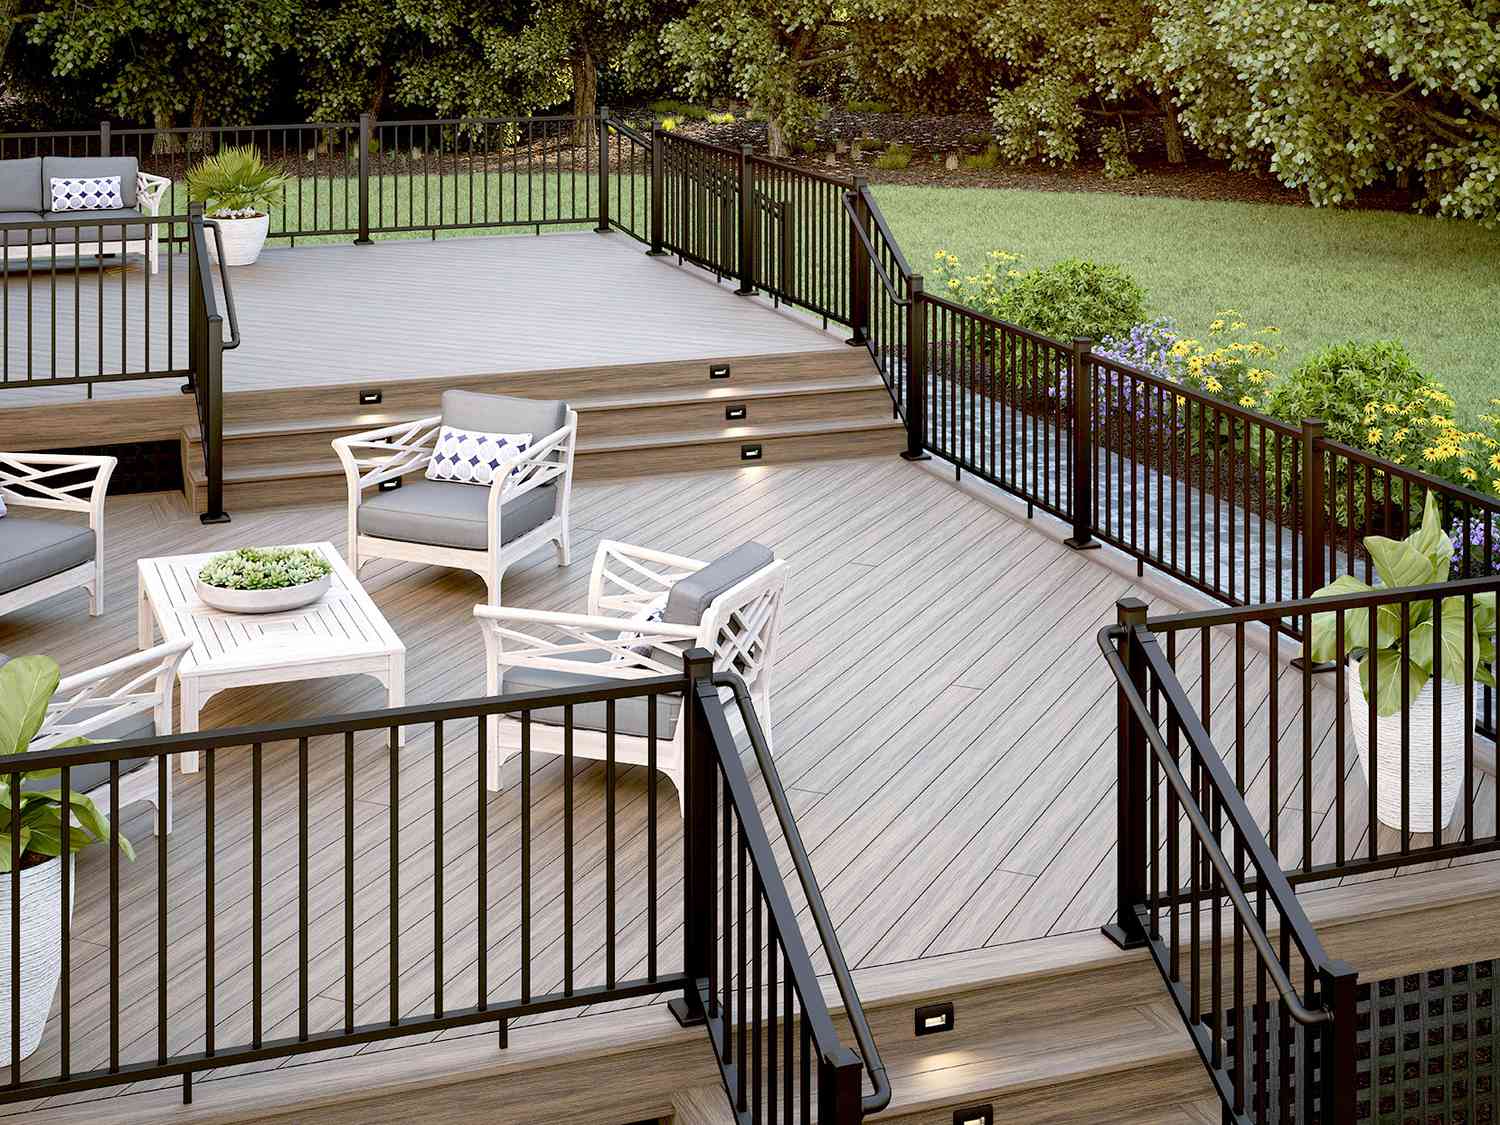 Porch with black railings and seating